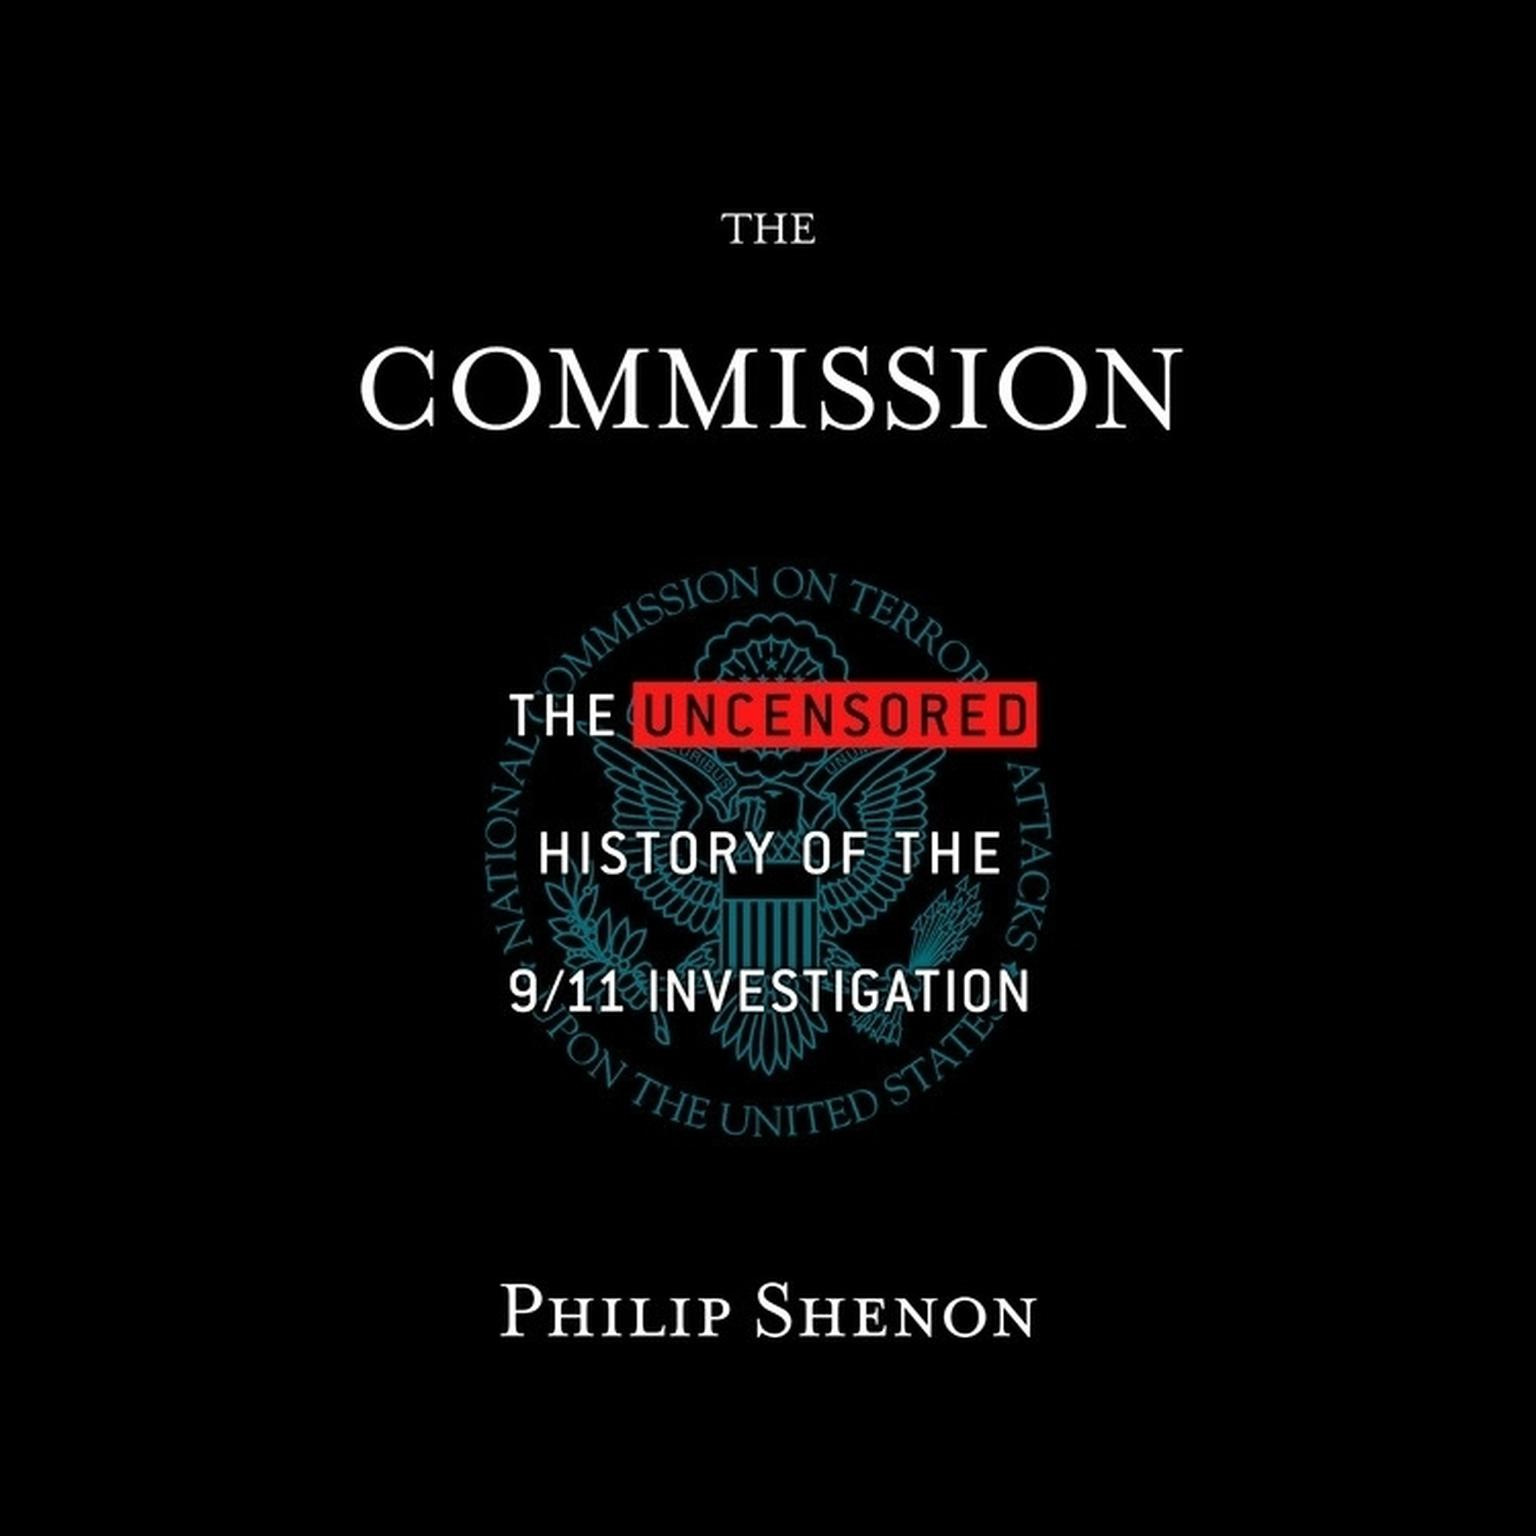 The Commission (Abridged): The Uncensored History of the 9/11 Investigation Audiobook, by Philip Shenon